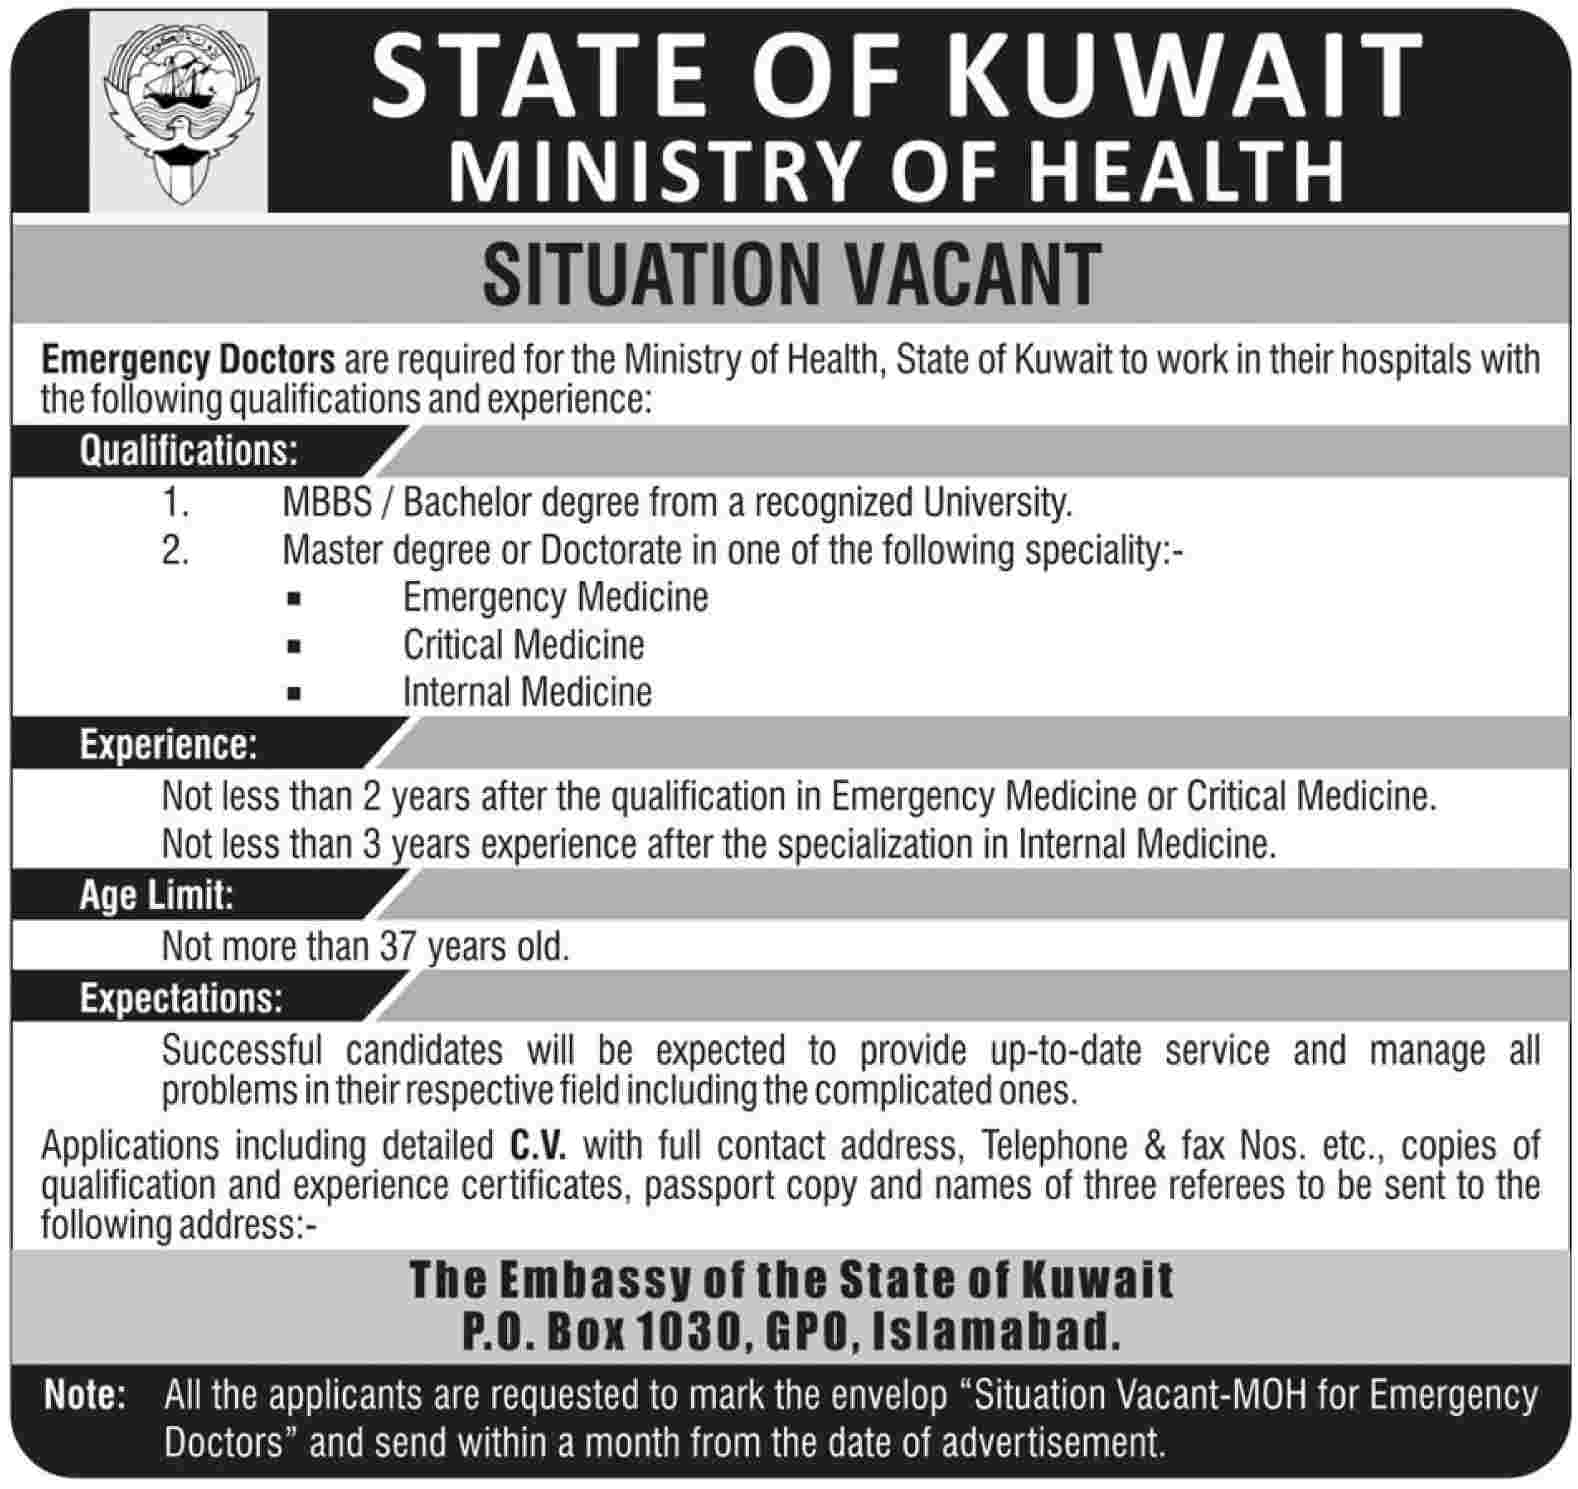 State of Kuwait Ministry of Health Situation Vacant